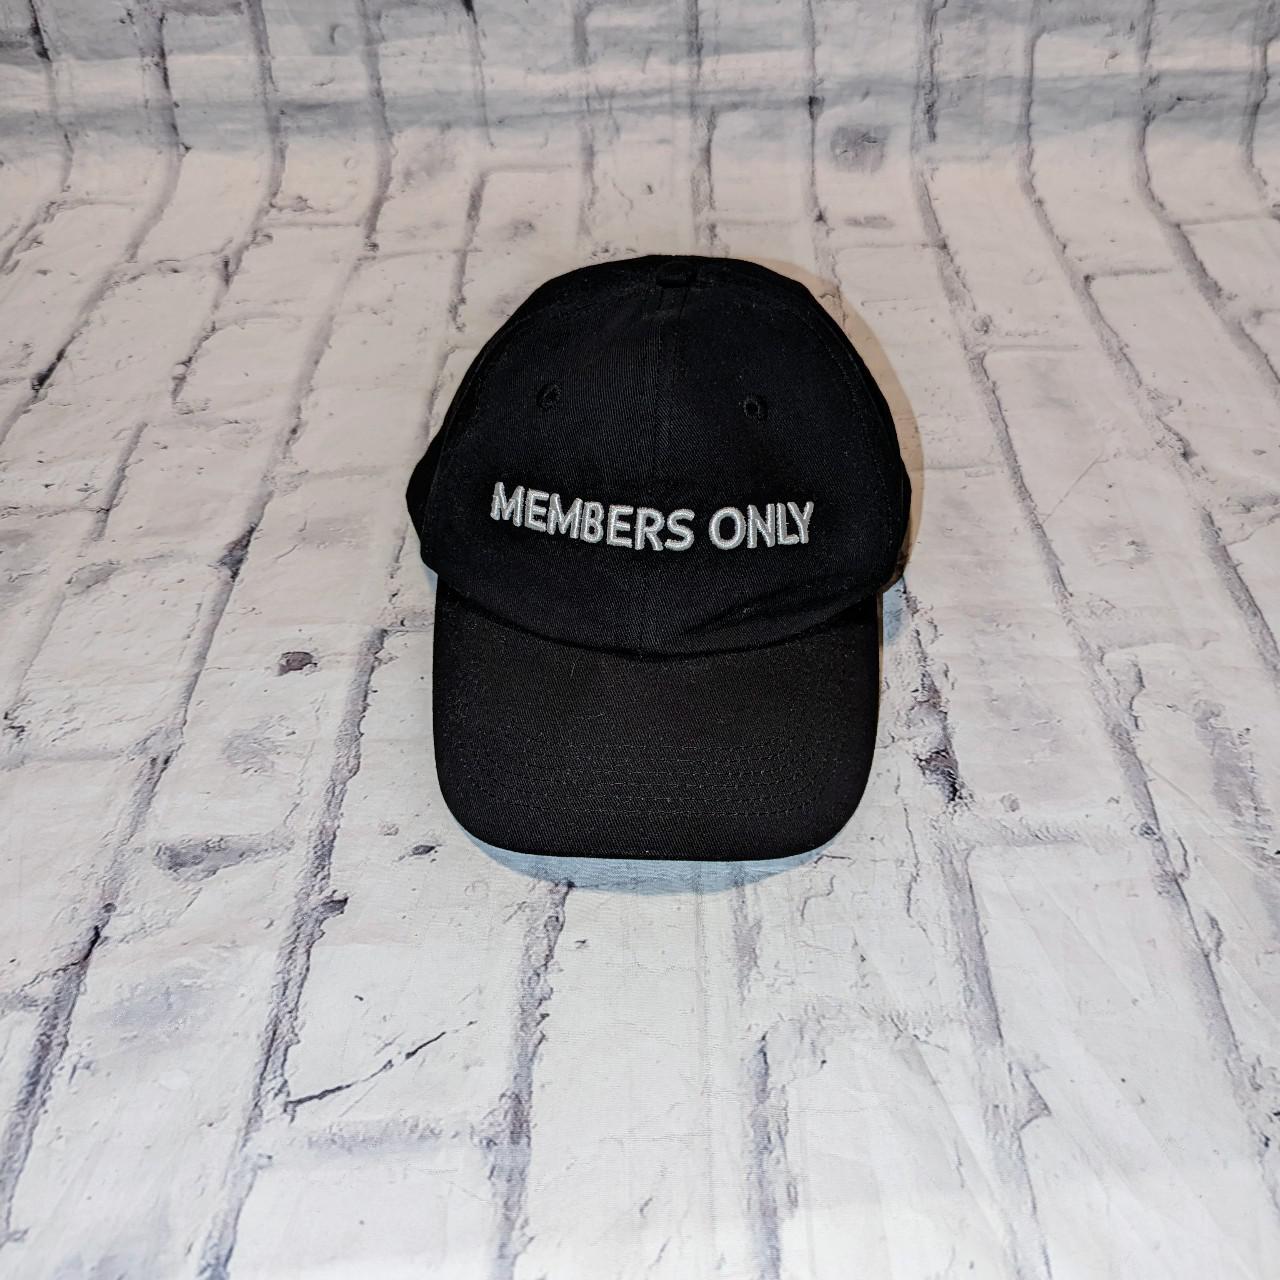 Product Image 1 - Members Only embroidered script hat

Gently